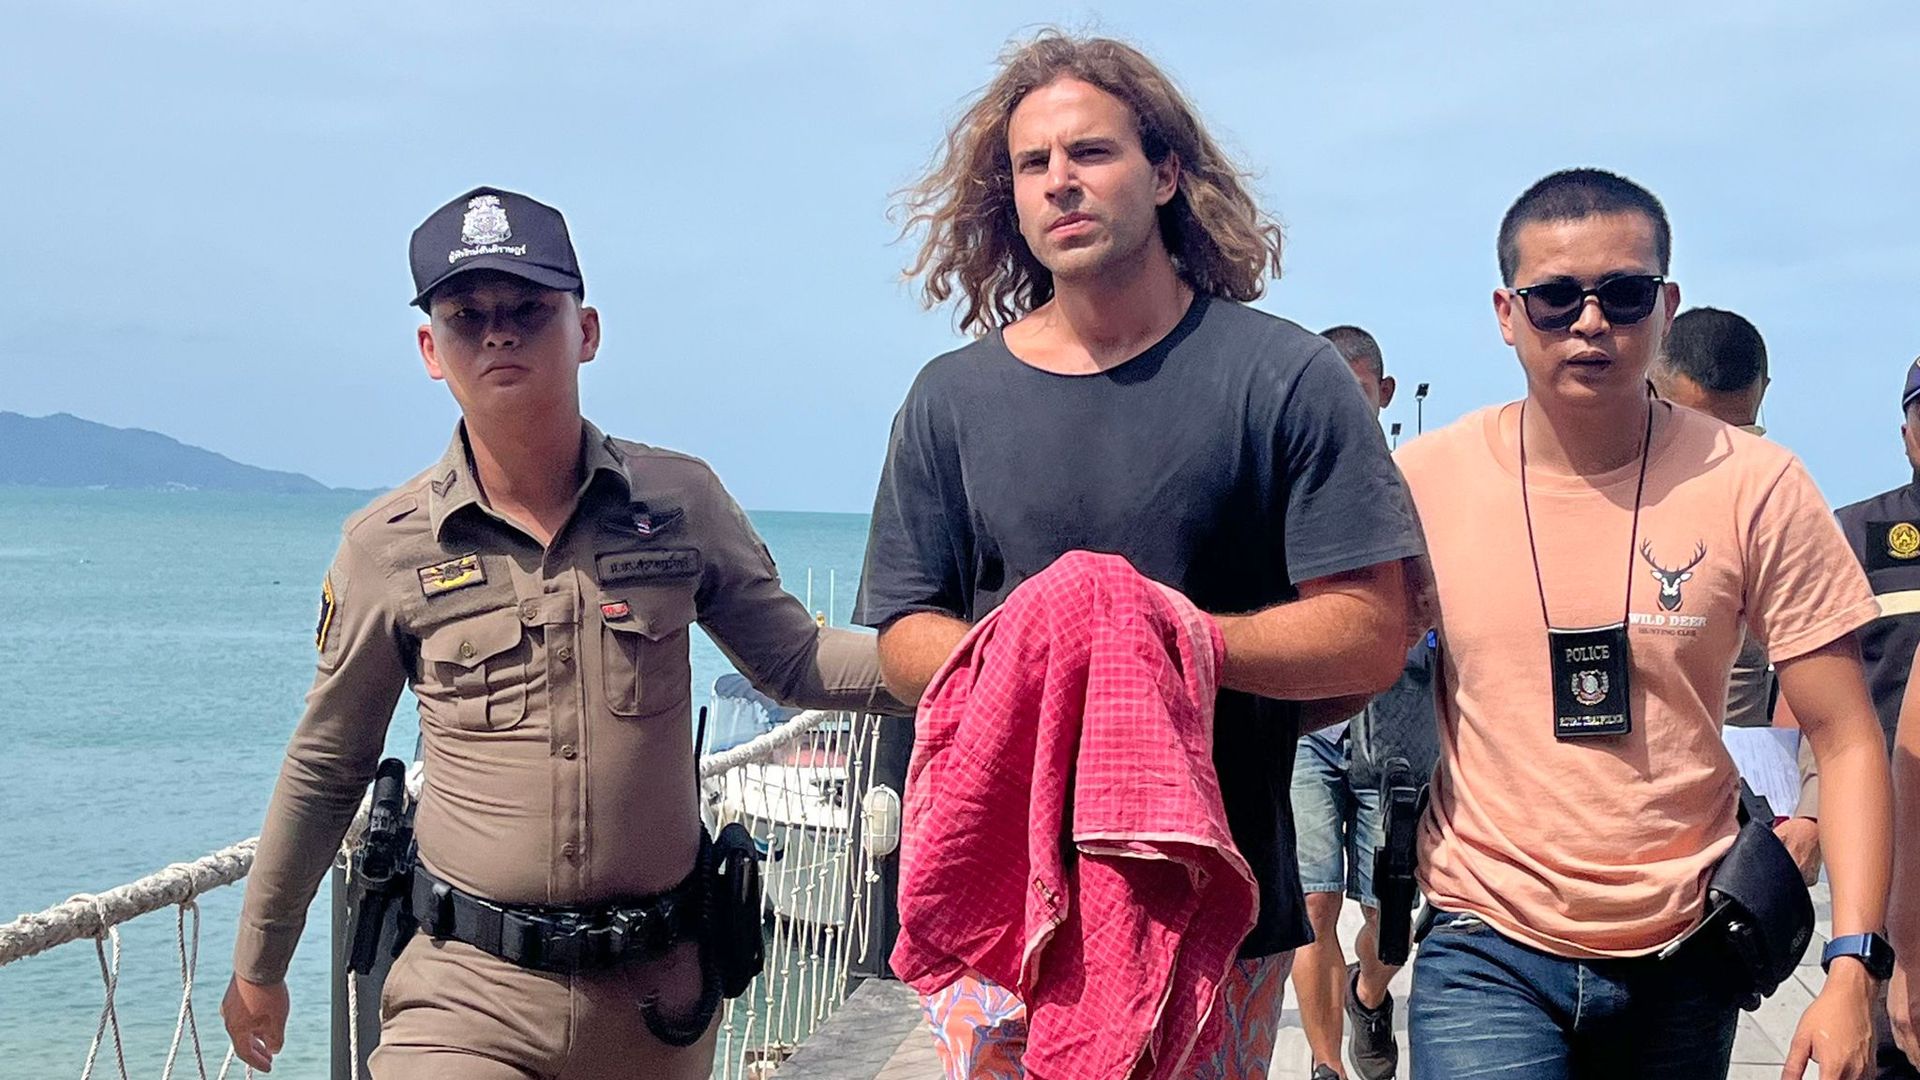 A Spanish chef alleged murder suspect Daniel Jeronimo Sancho Bronchalo is escorted by Thai police officers as they arrive at a port before going to the court in Koh Samui island